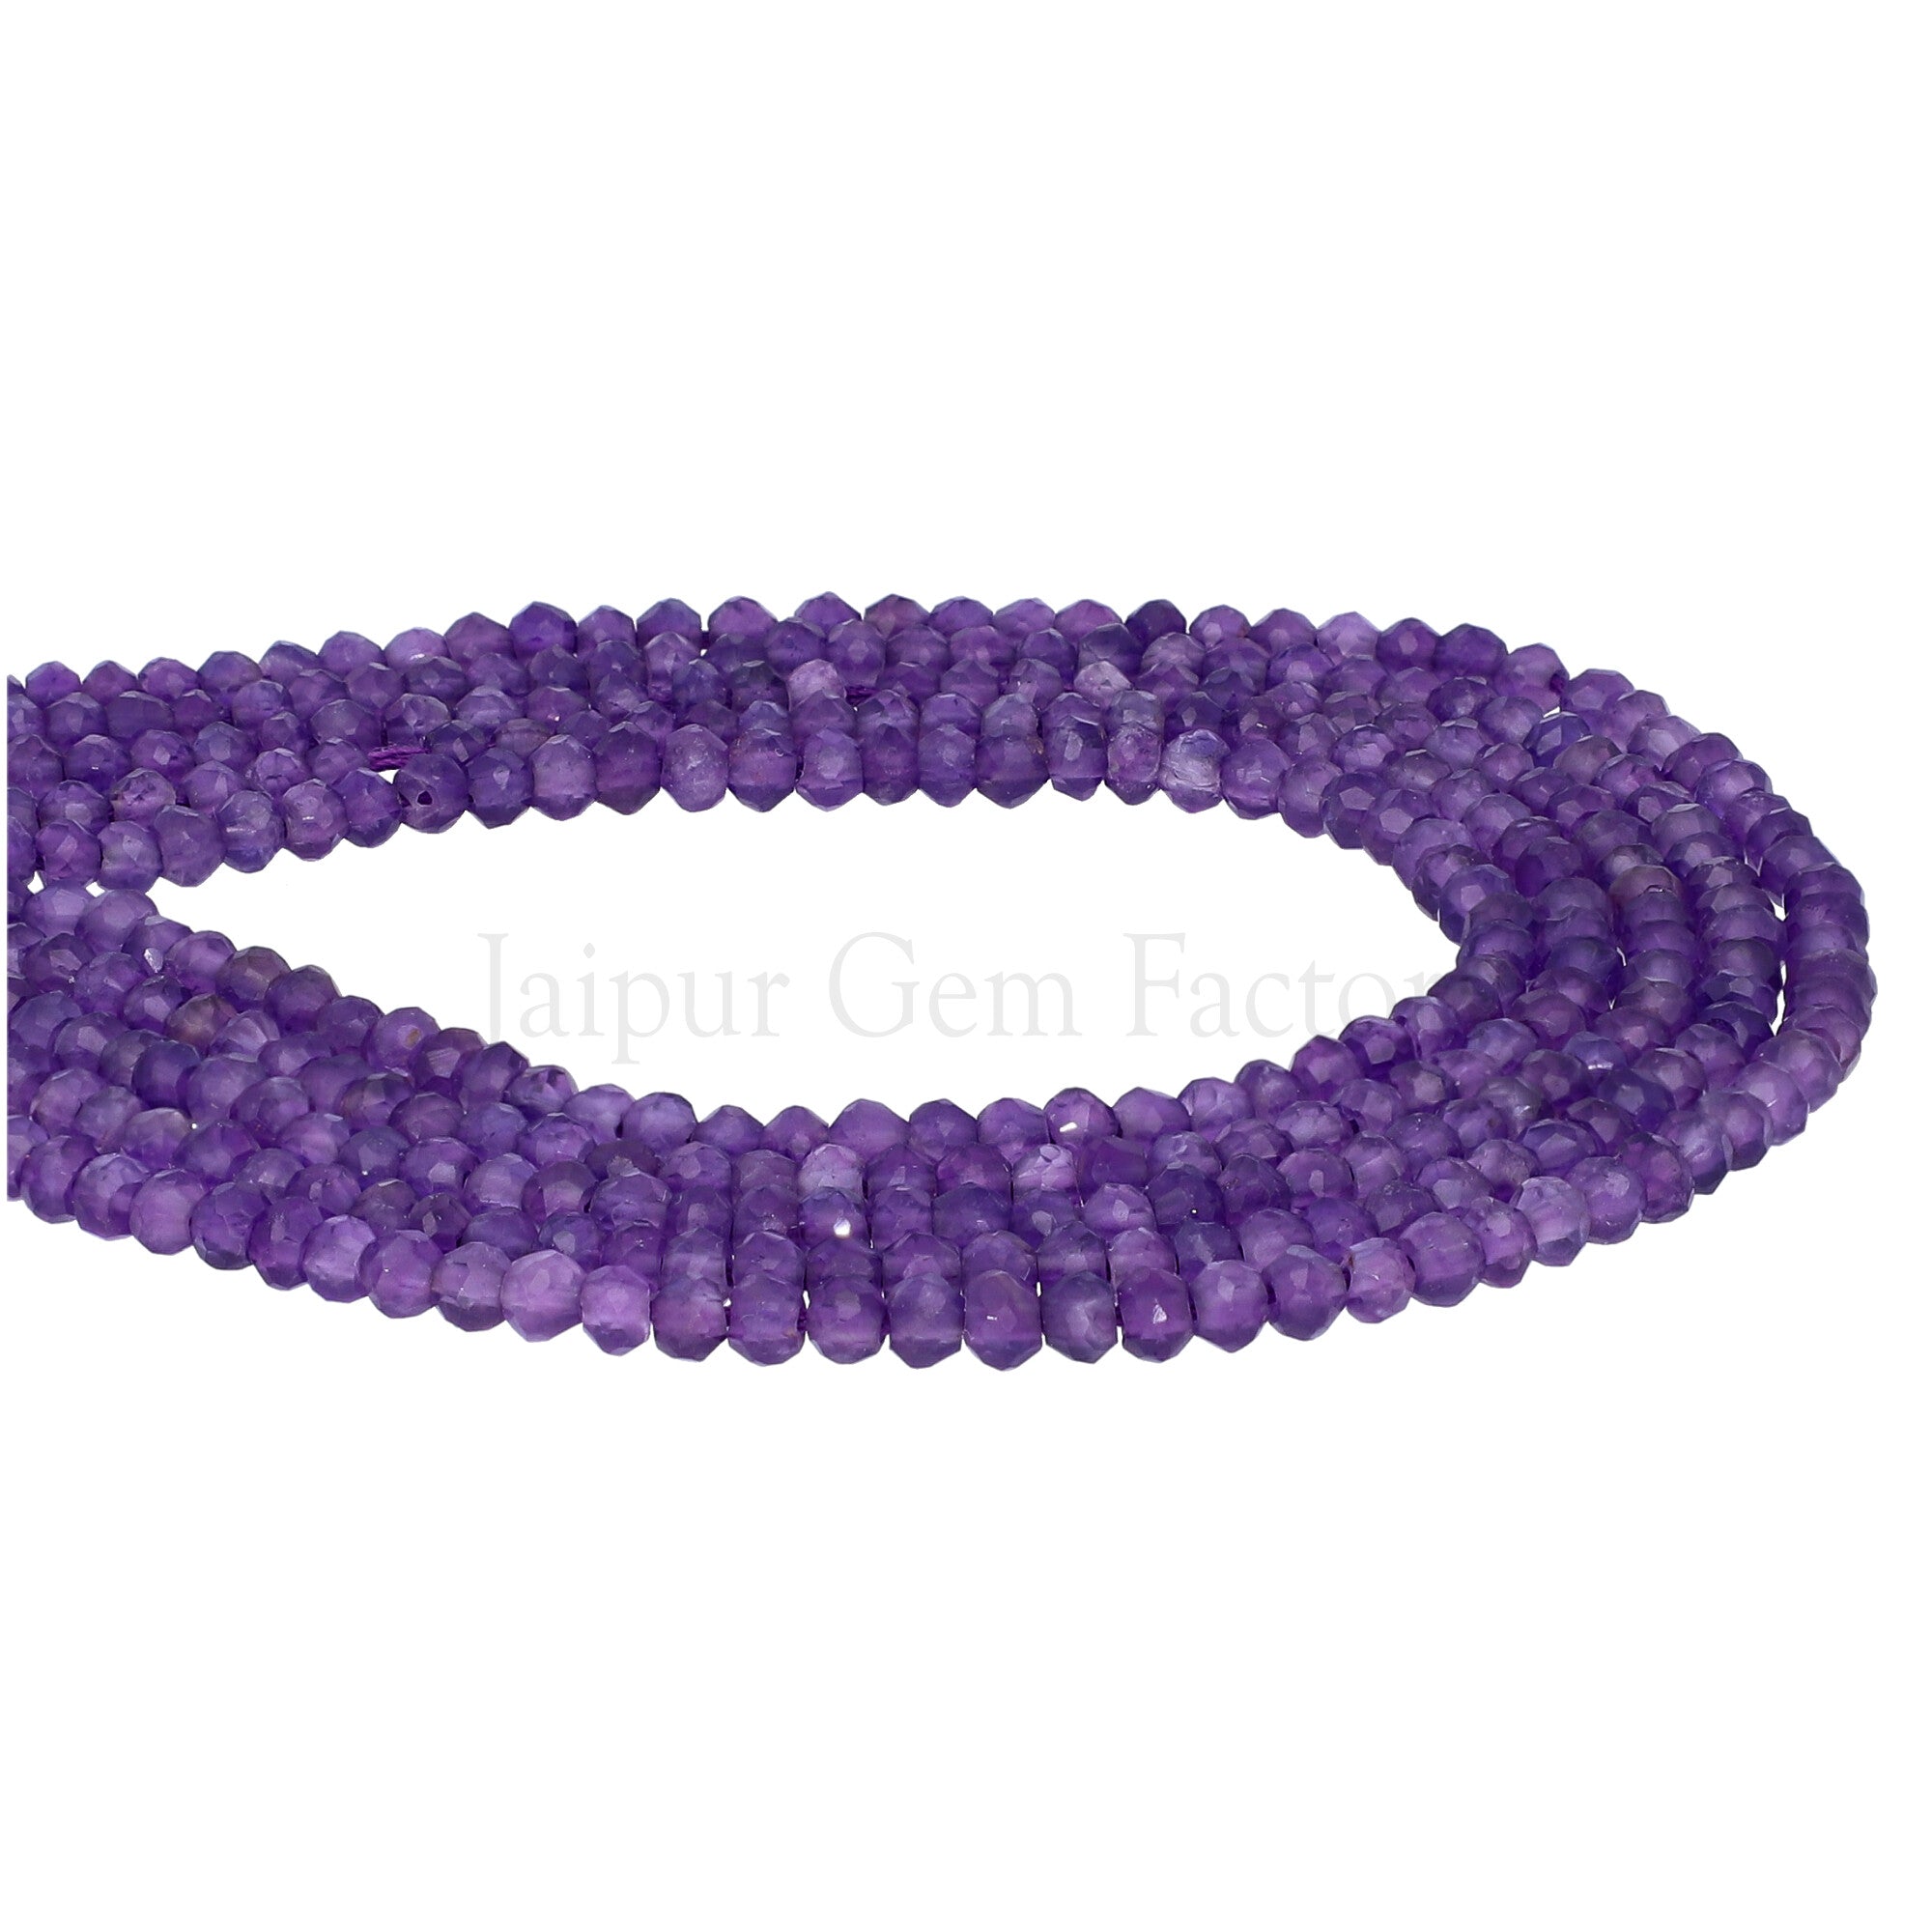 Amethyst 3.5 To 4 MM Faceted Rondelle Shape Beads Strand